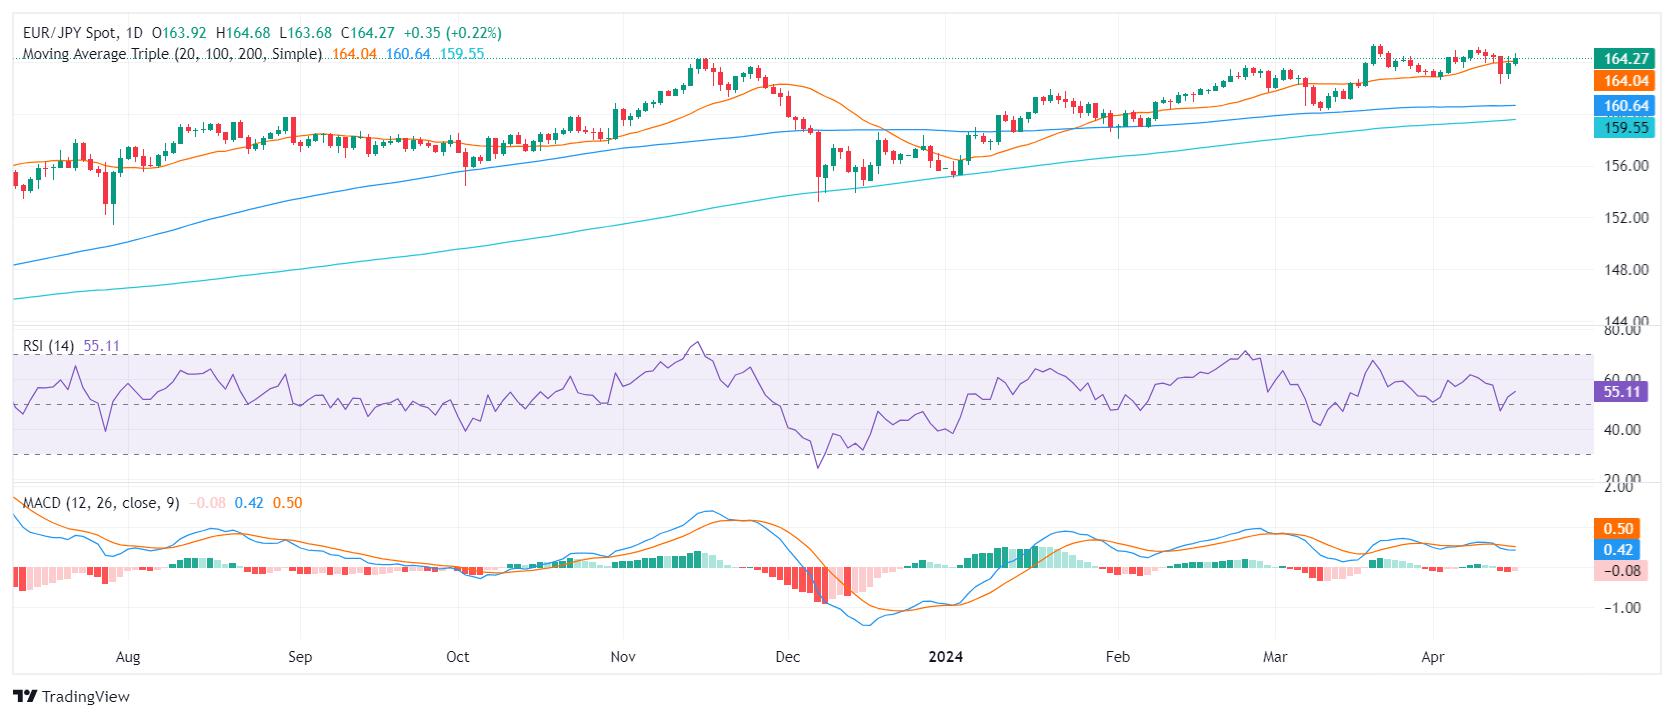 EUR/JPY Price Analysis: Bulls make a stride and reclaim the 20-day SMA